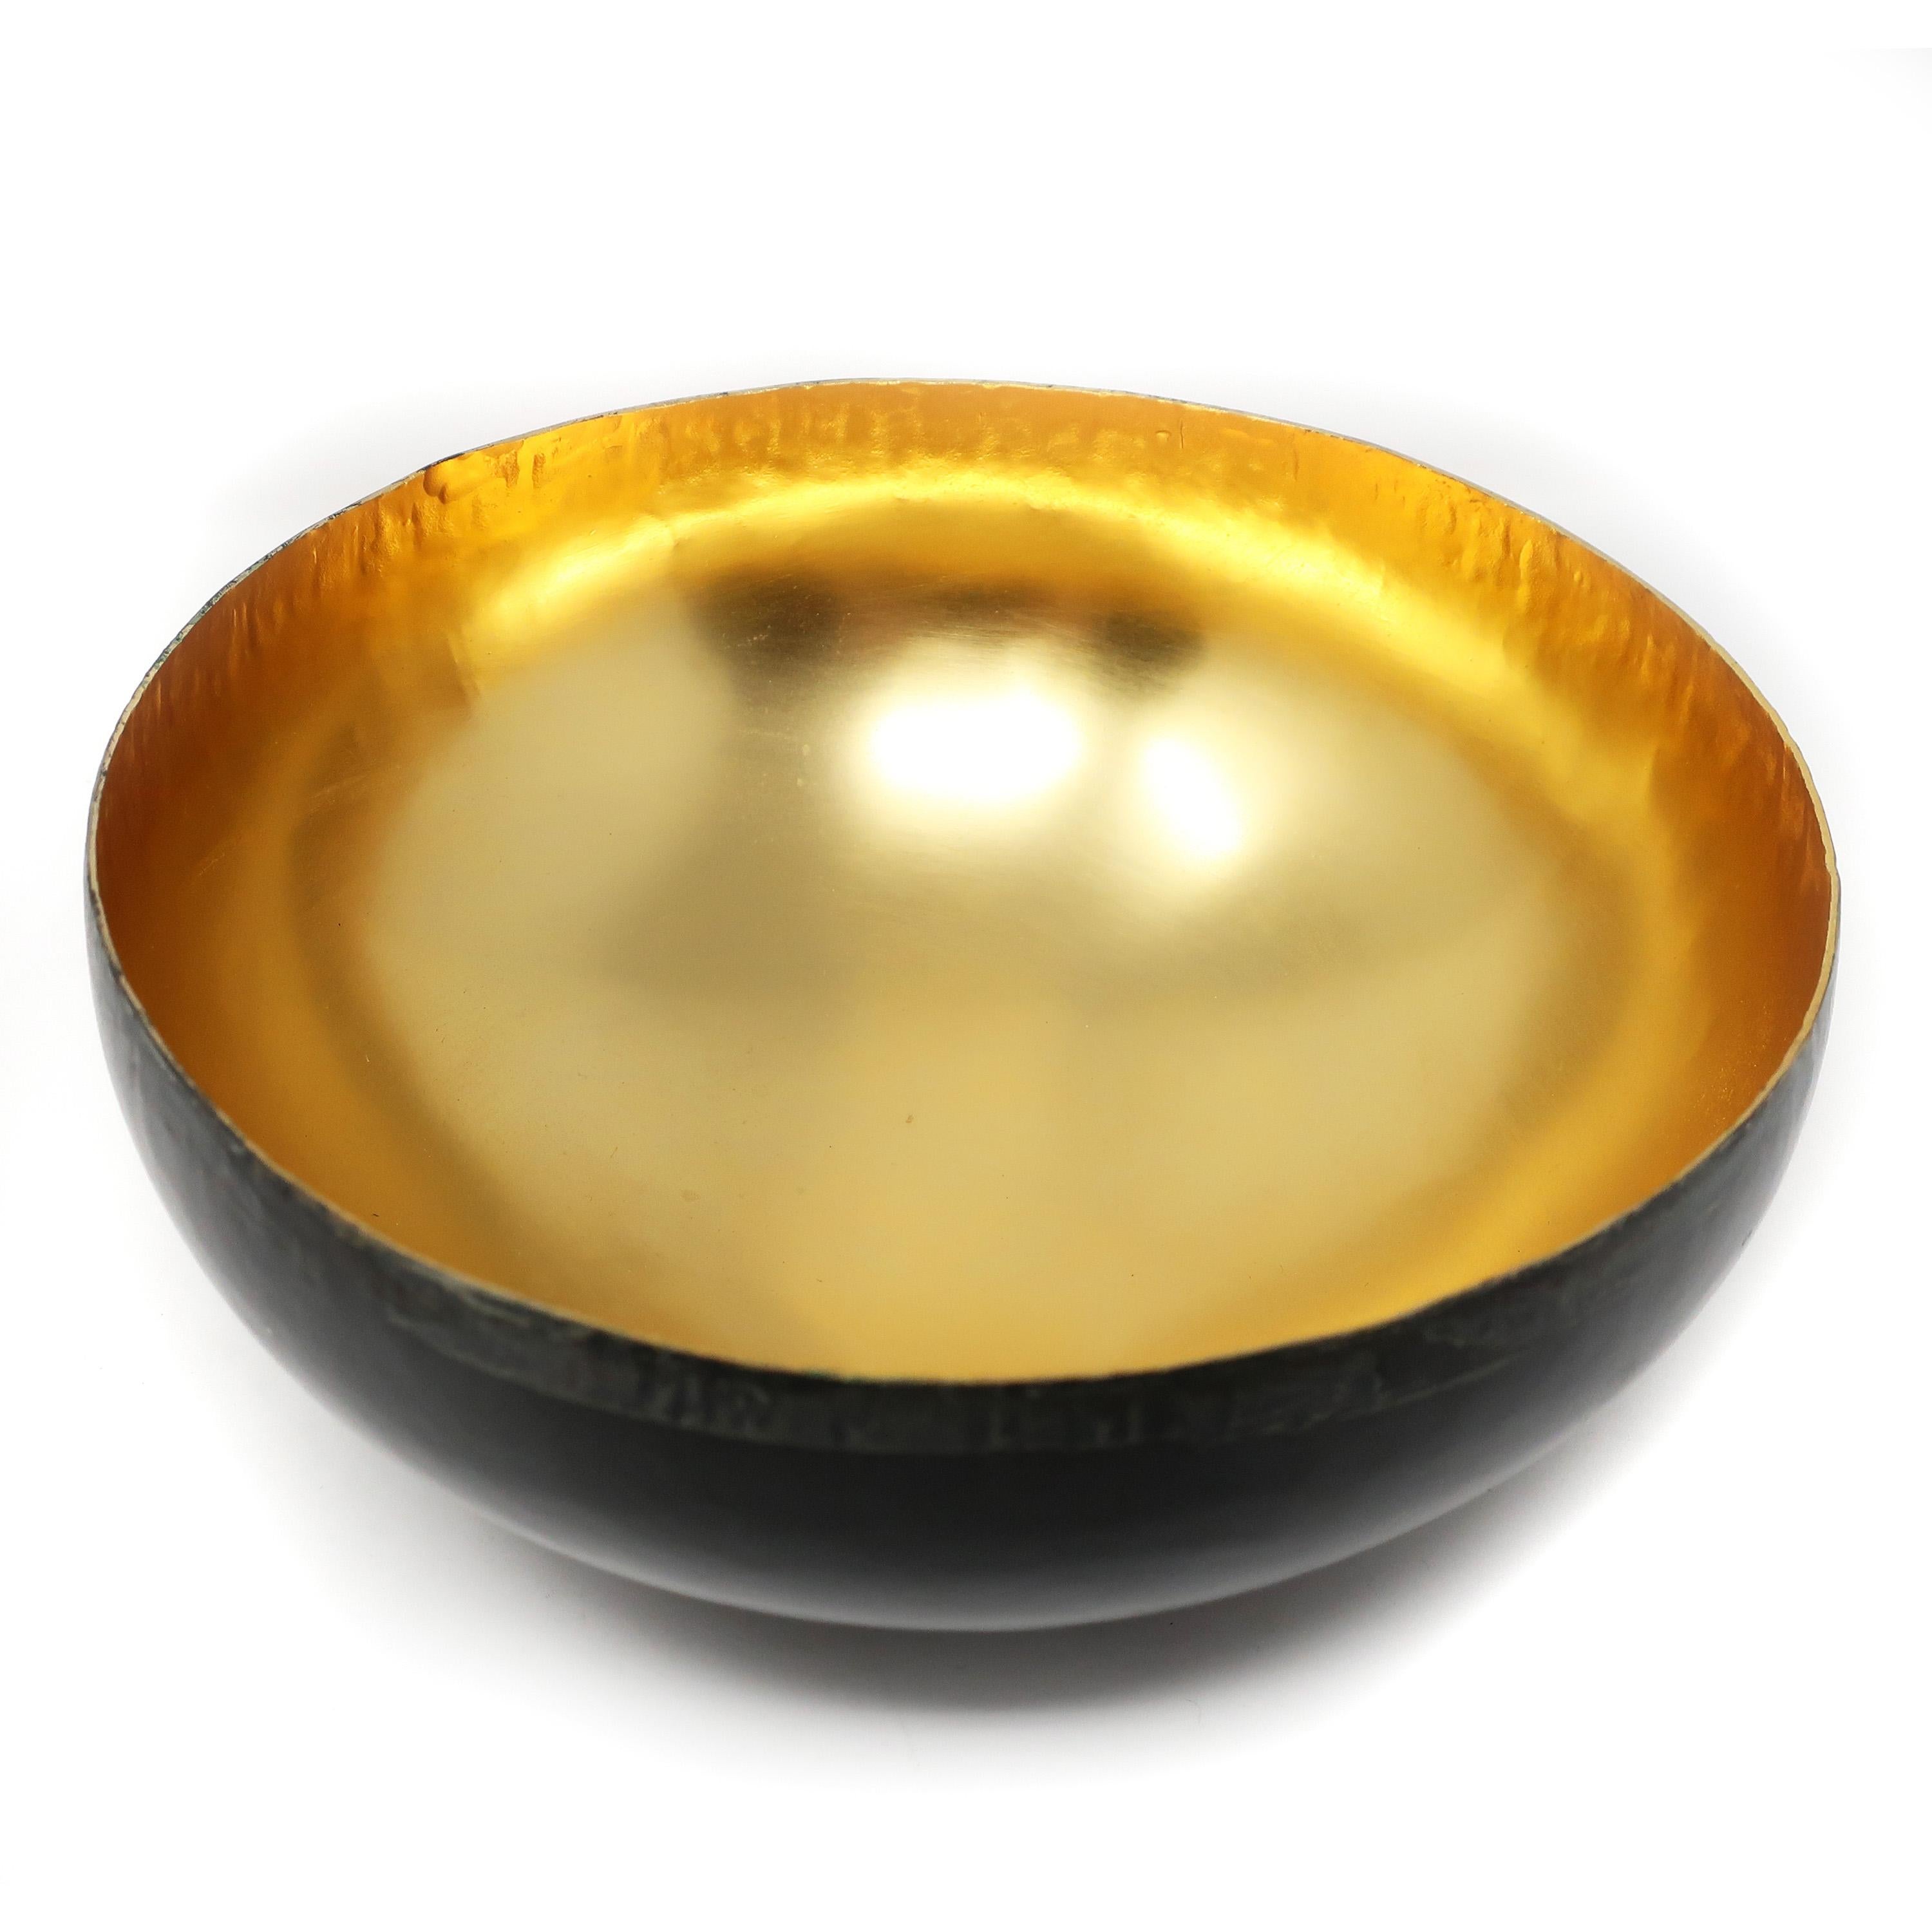 A lovely bowl from Michael Aram’s Sona collection. A 24-karat gold plated interior and oxidized bronze exterior on an 8.75” diameter bowl with a purposefully distressed rim. This is the middle size version of this bowl and it comes with the original